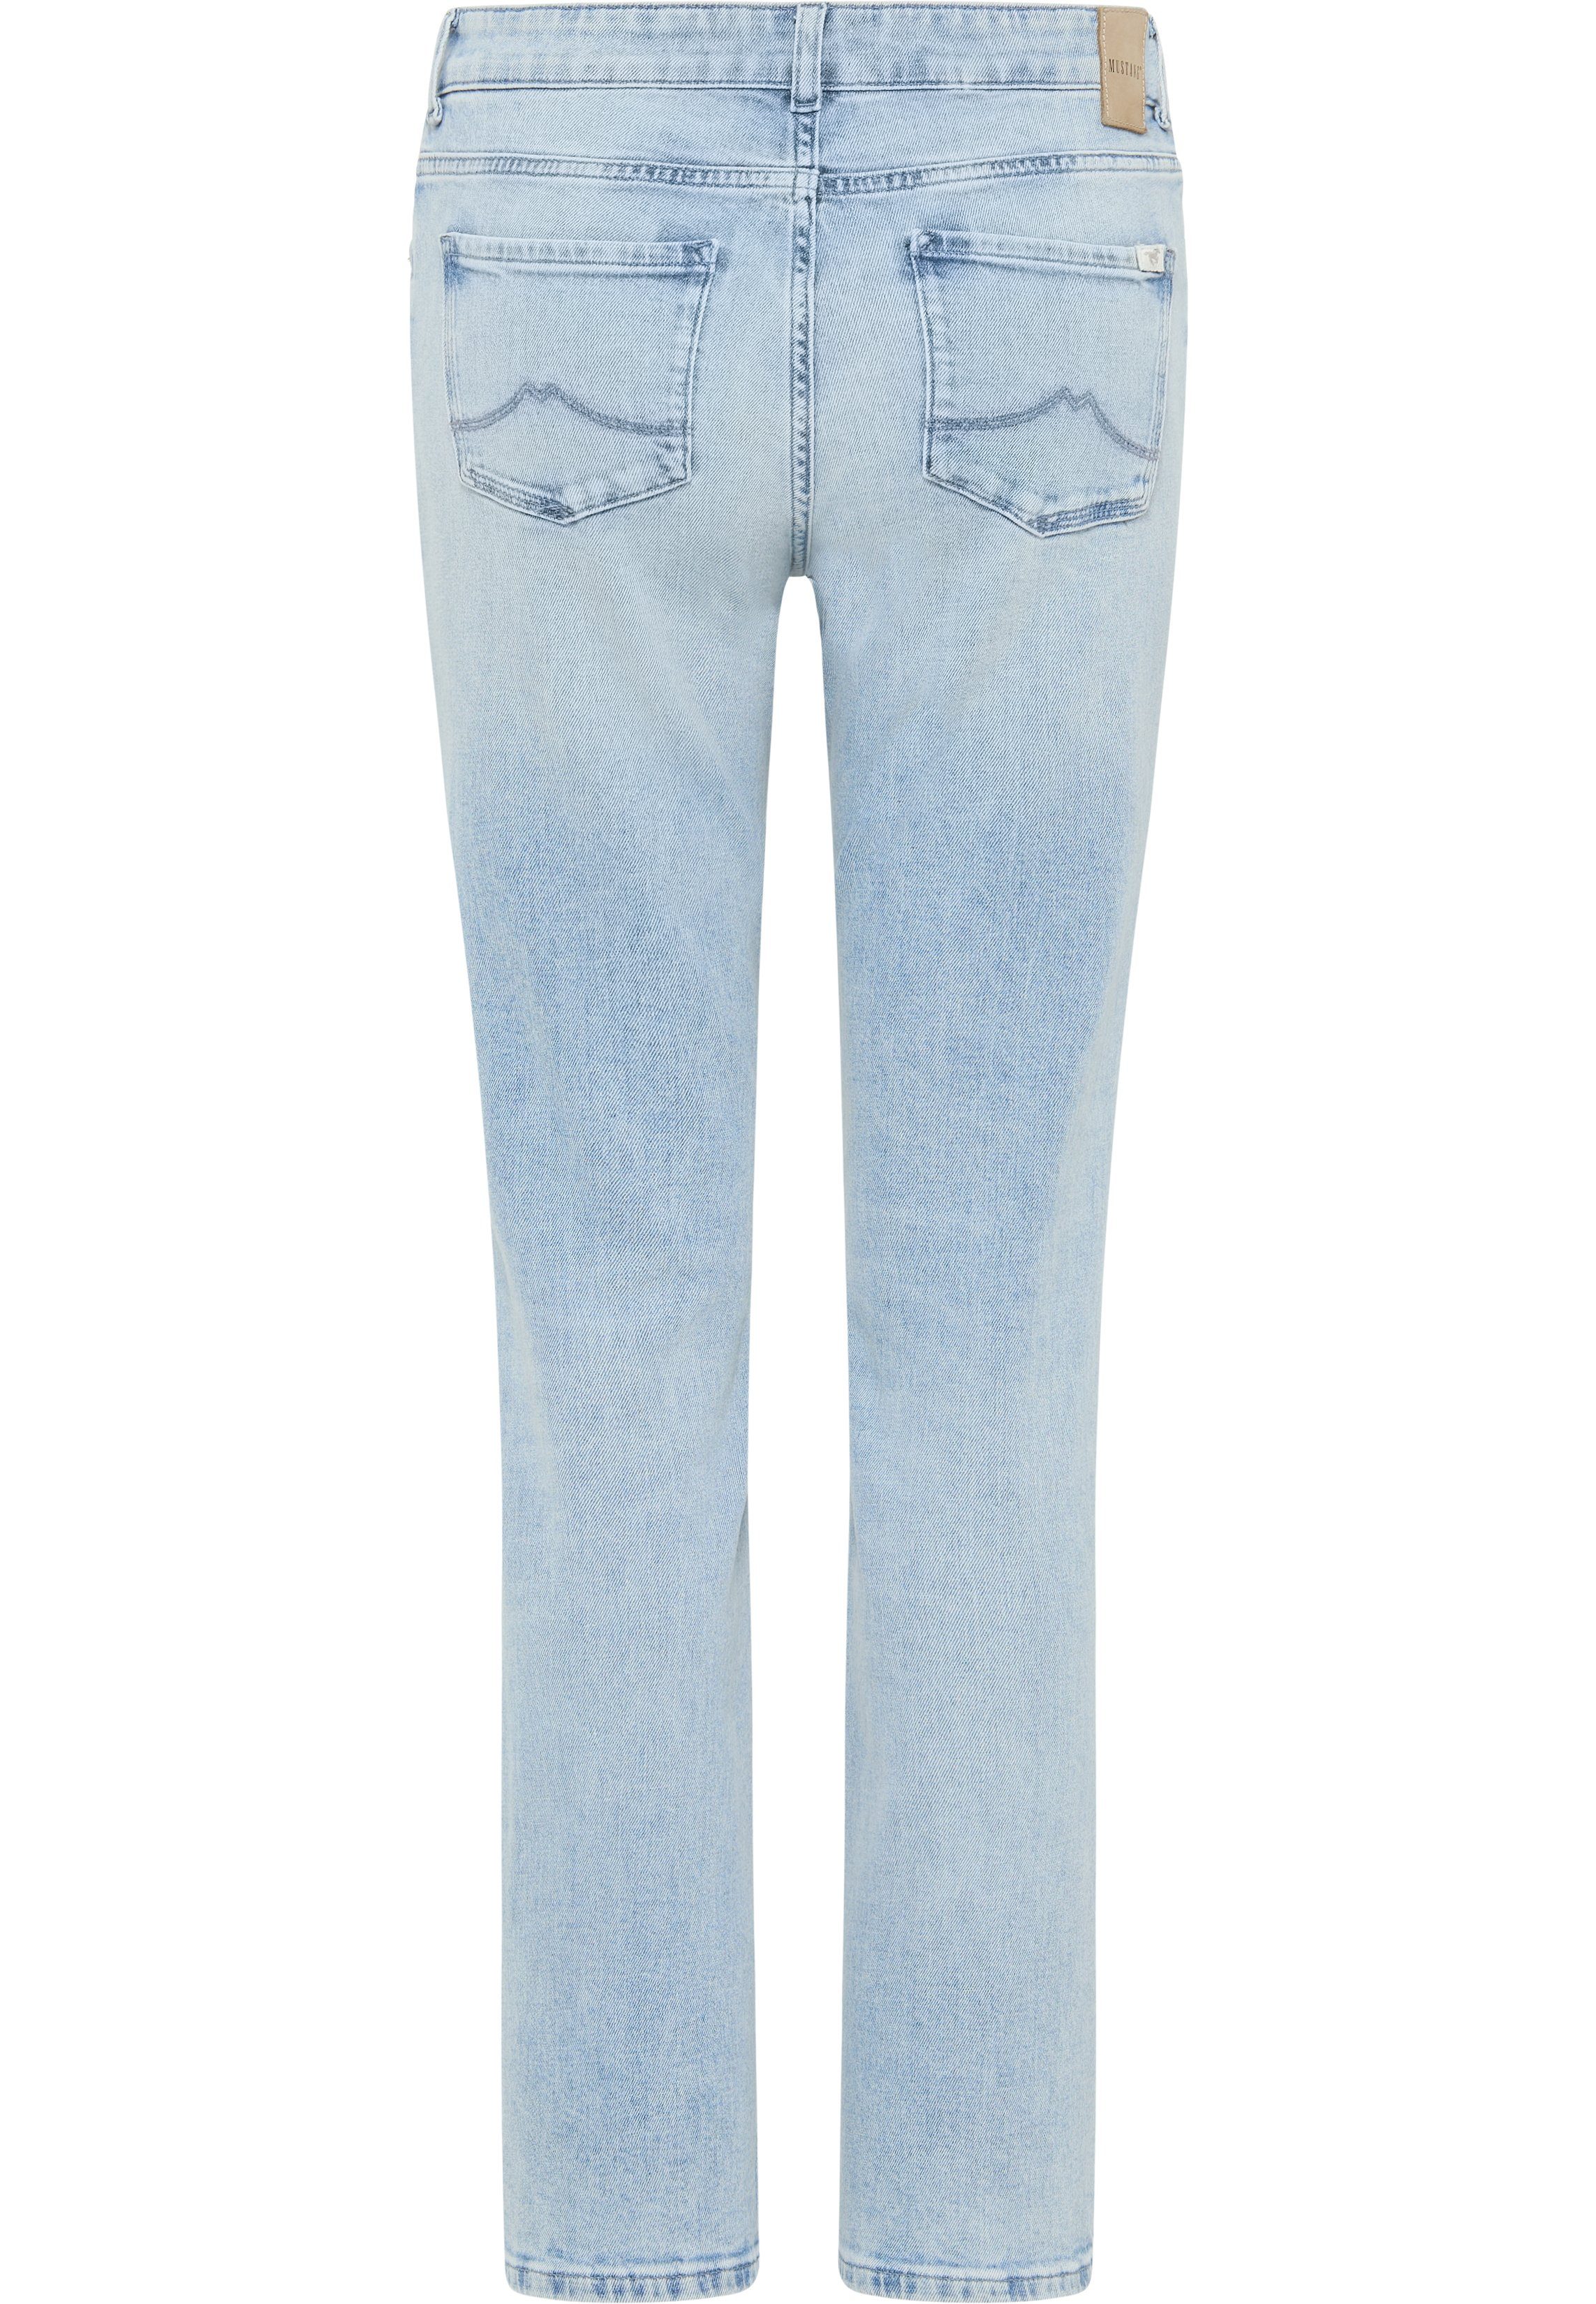 Crosby MUSTANG Relaxed Straight Straight-Jeans hellblau-5000402 Style